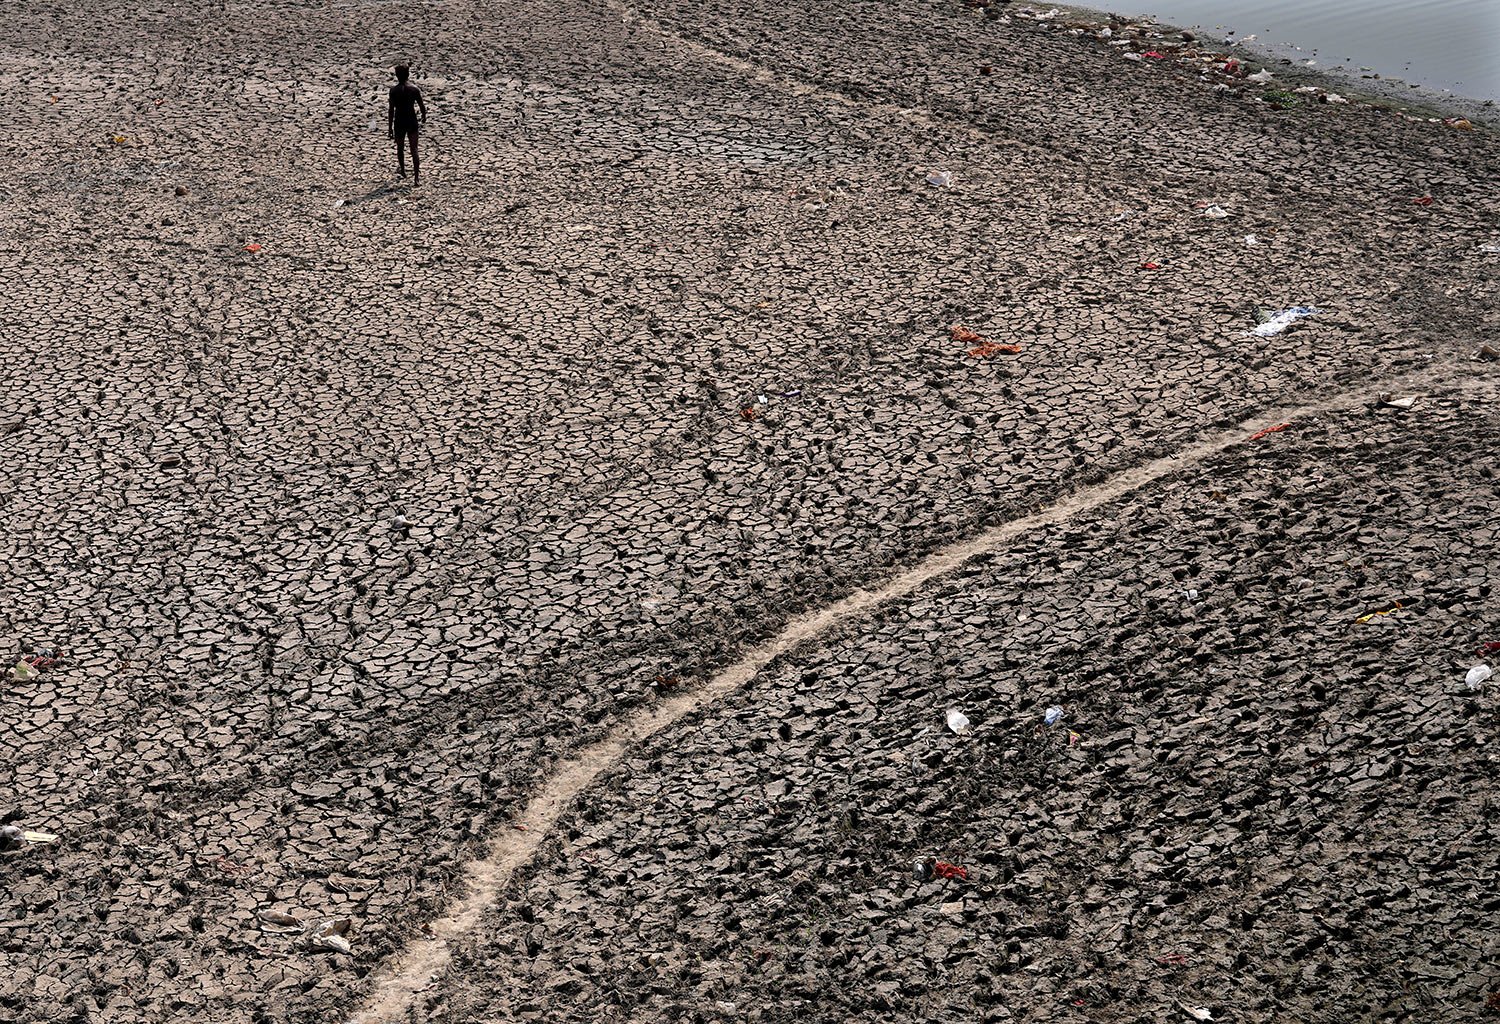  A man walks across a dried bed of river Yamuna where water levels have reduced drastically following hot weather in New Delhi, India, Monday, May 2, 2022. (AP Photo/Manish Swarup) 